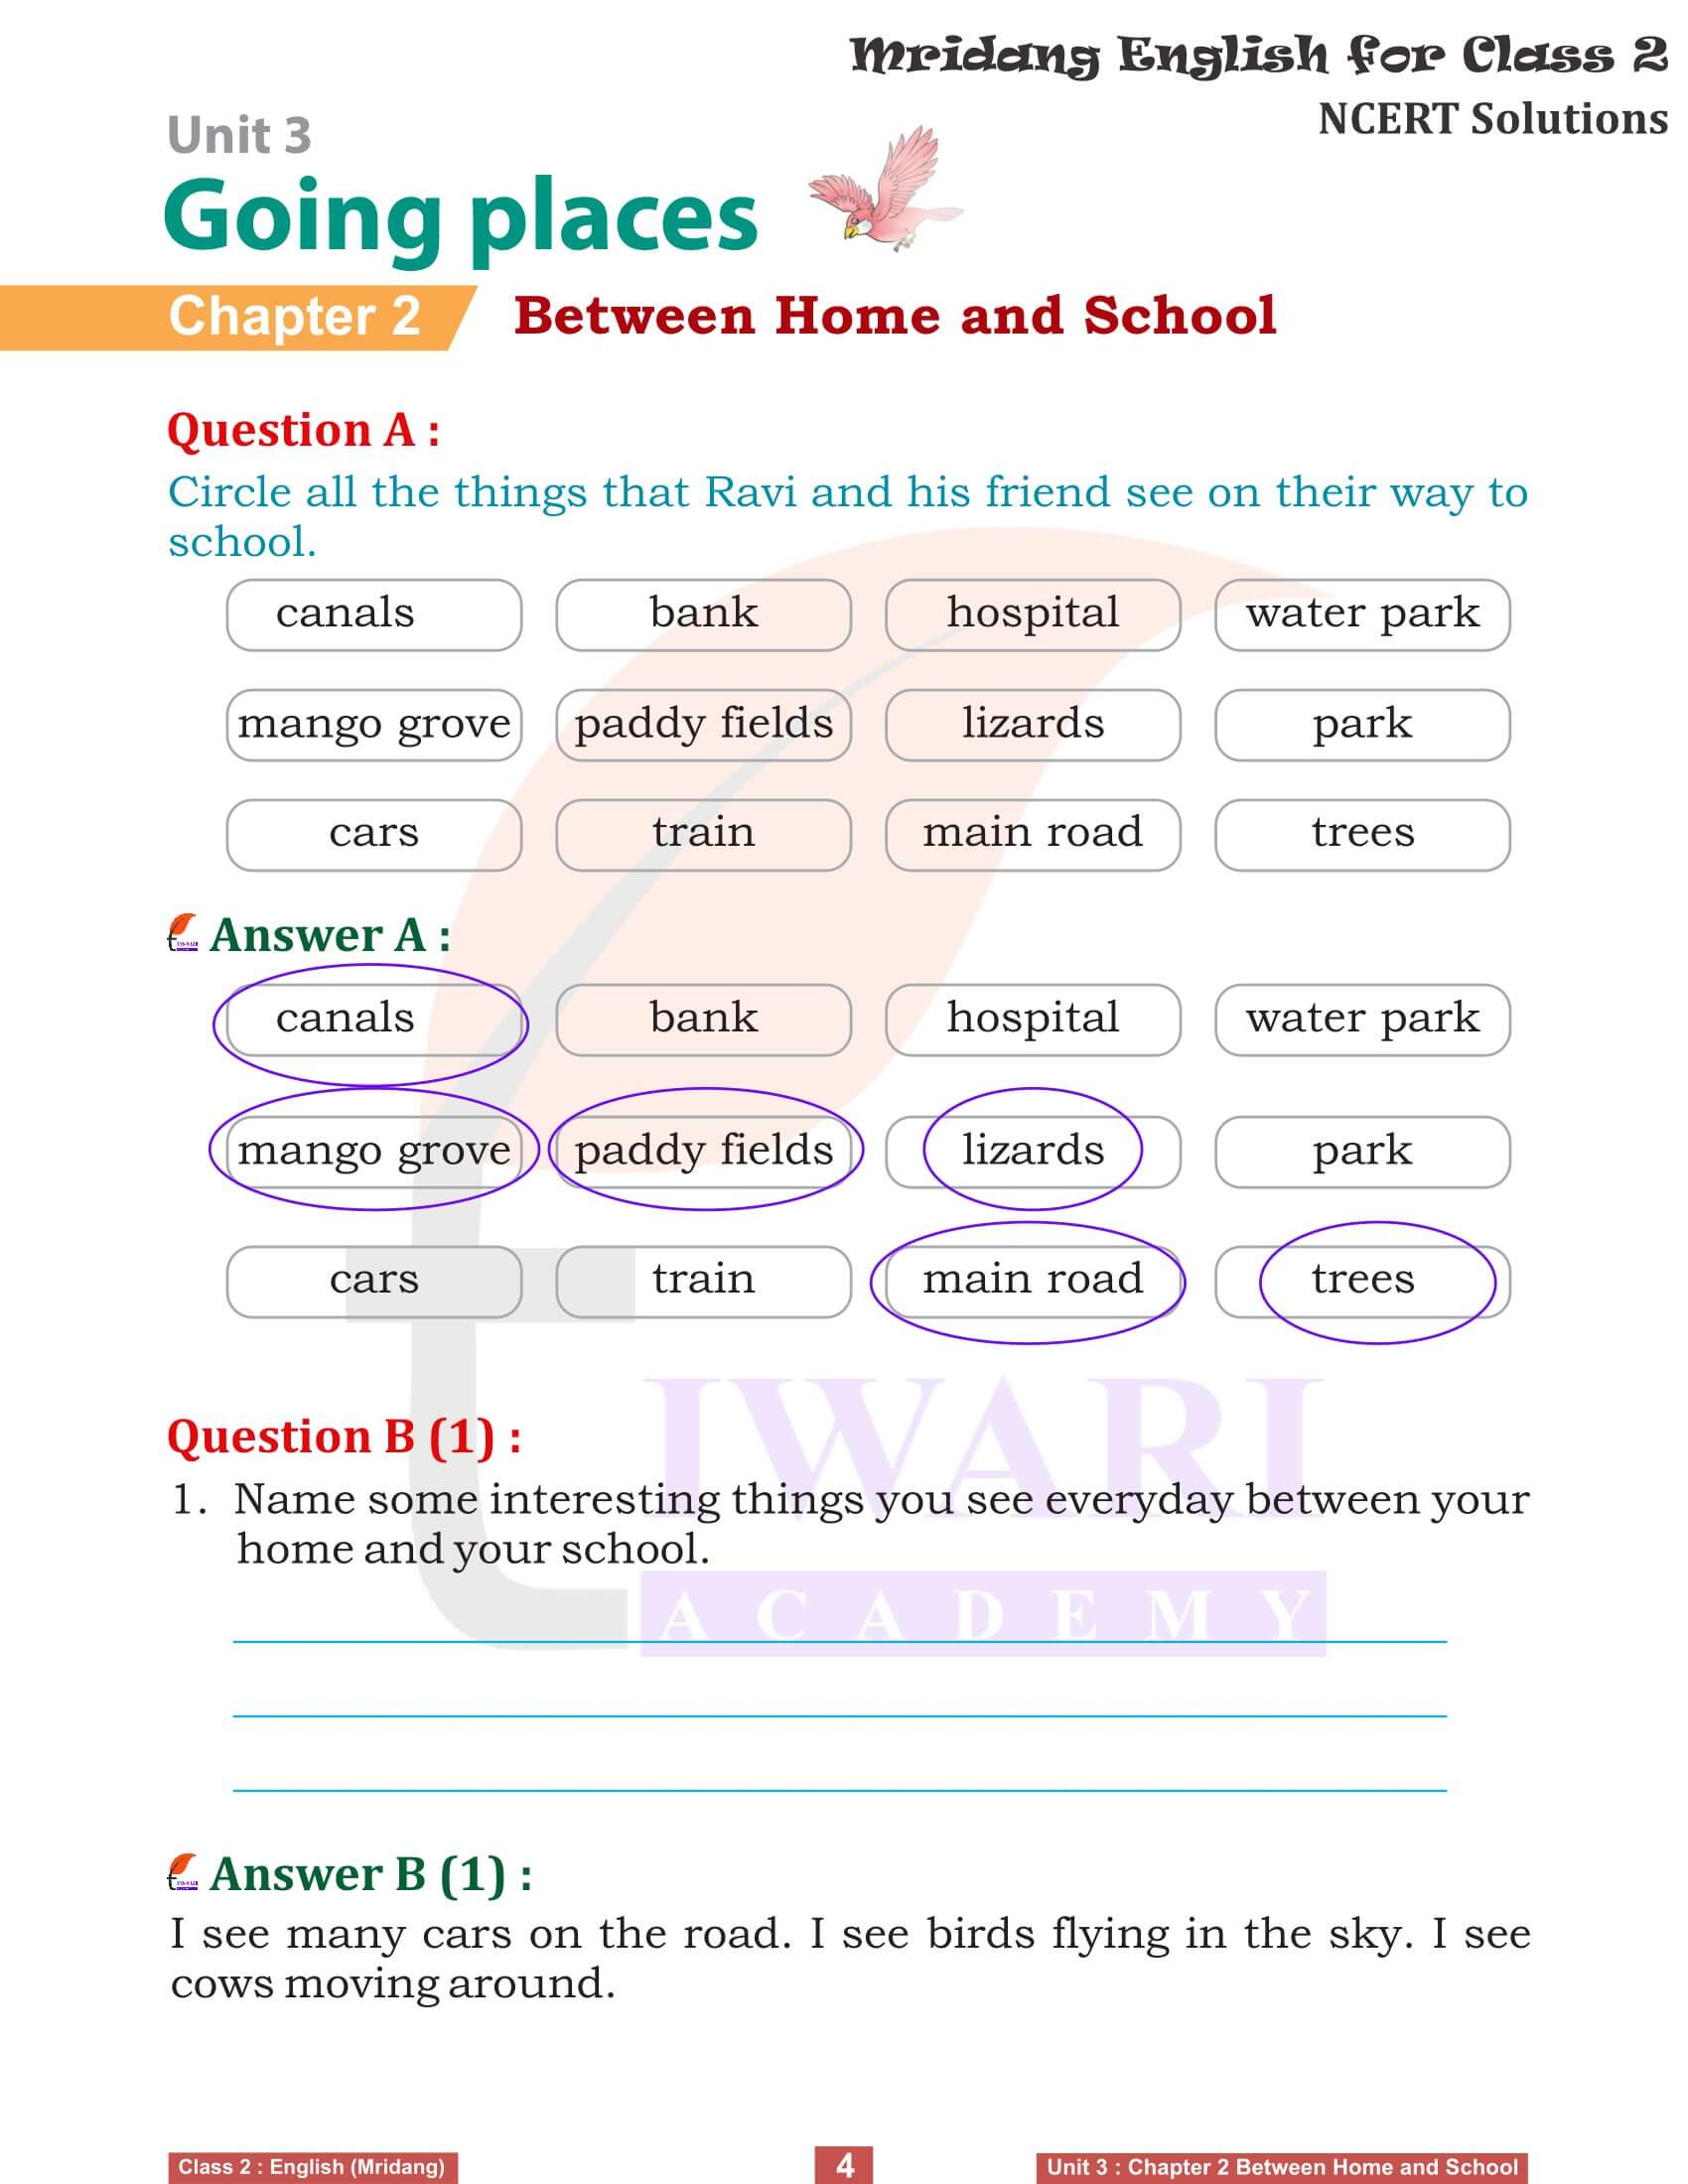 NCERT Solutions for Class 2 English Mridang Unit 3 Going Places Come Back Chapter 2 Exercises